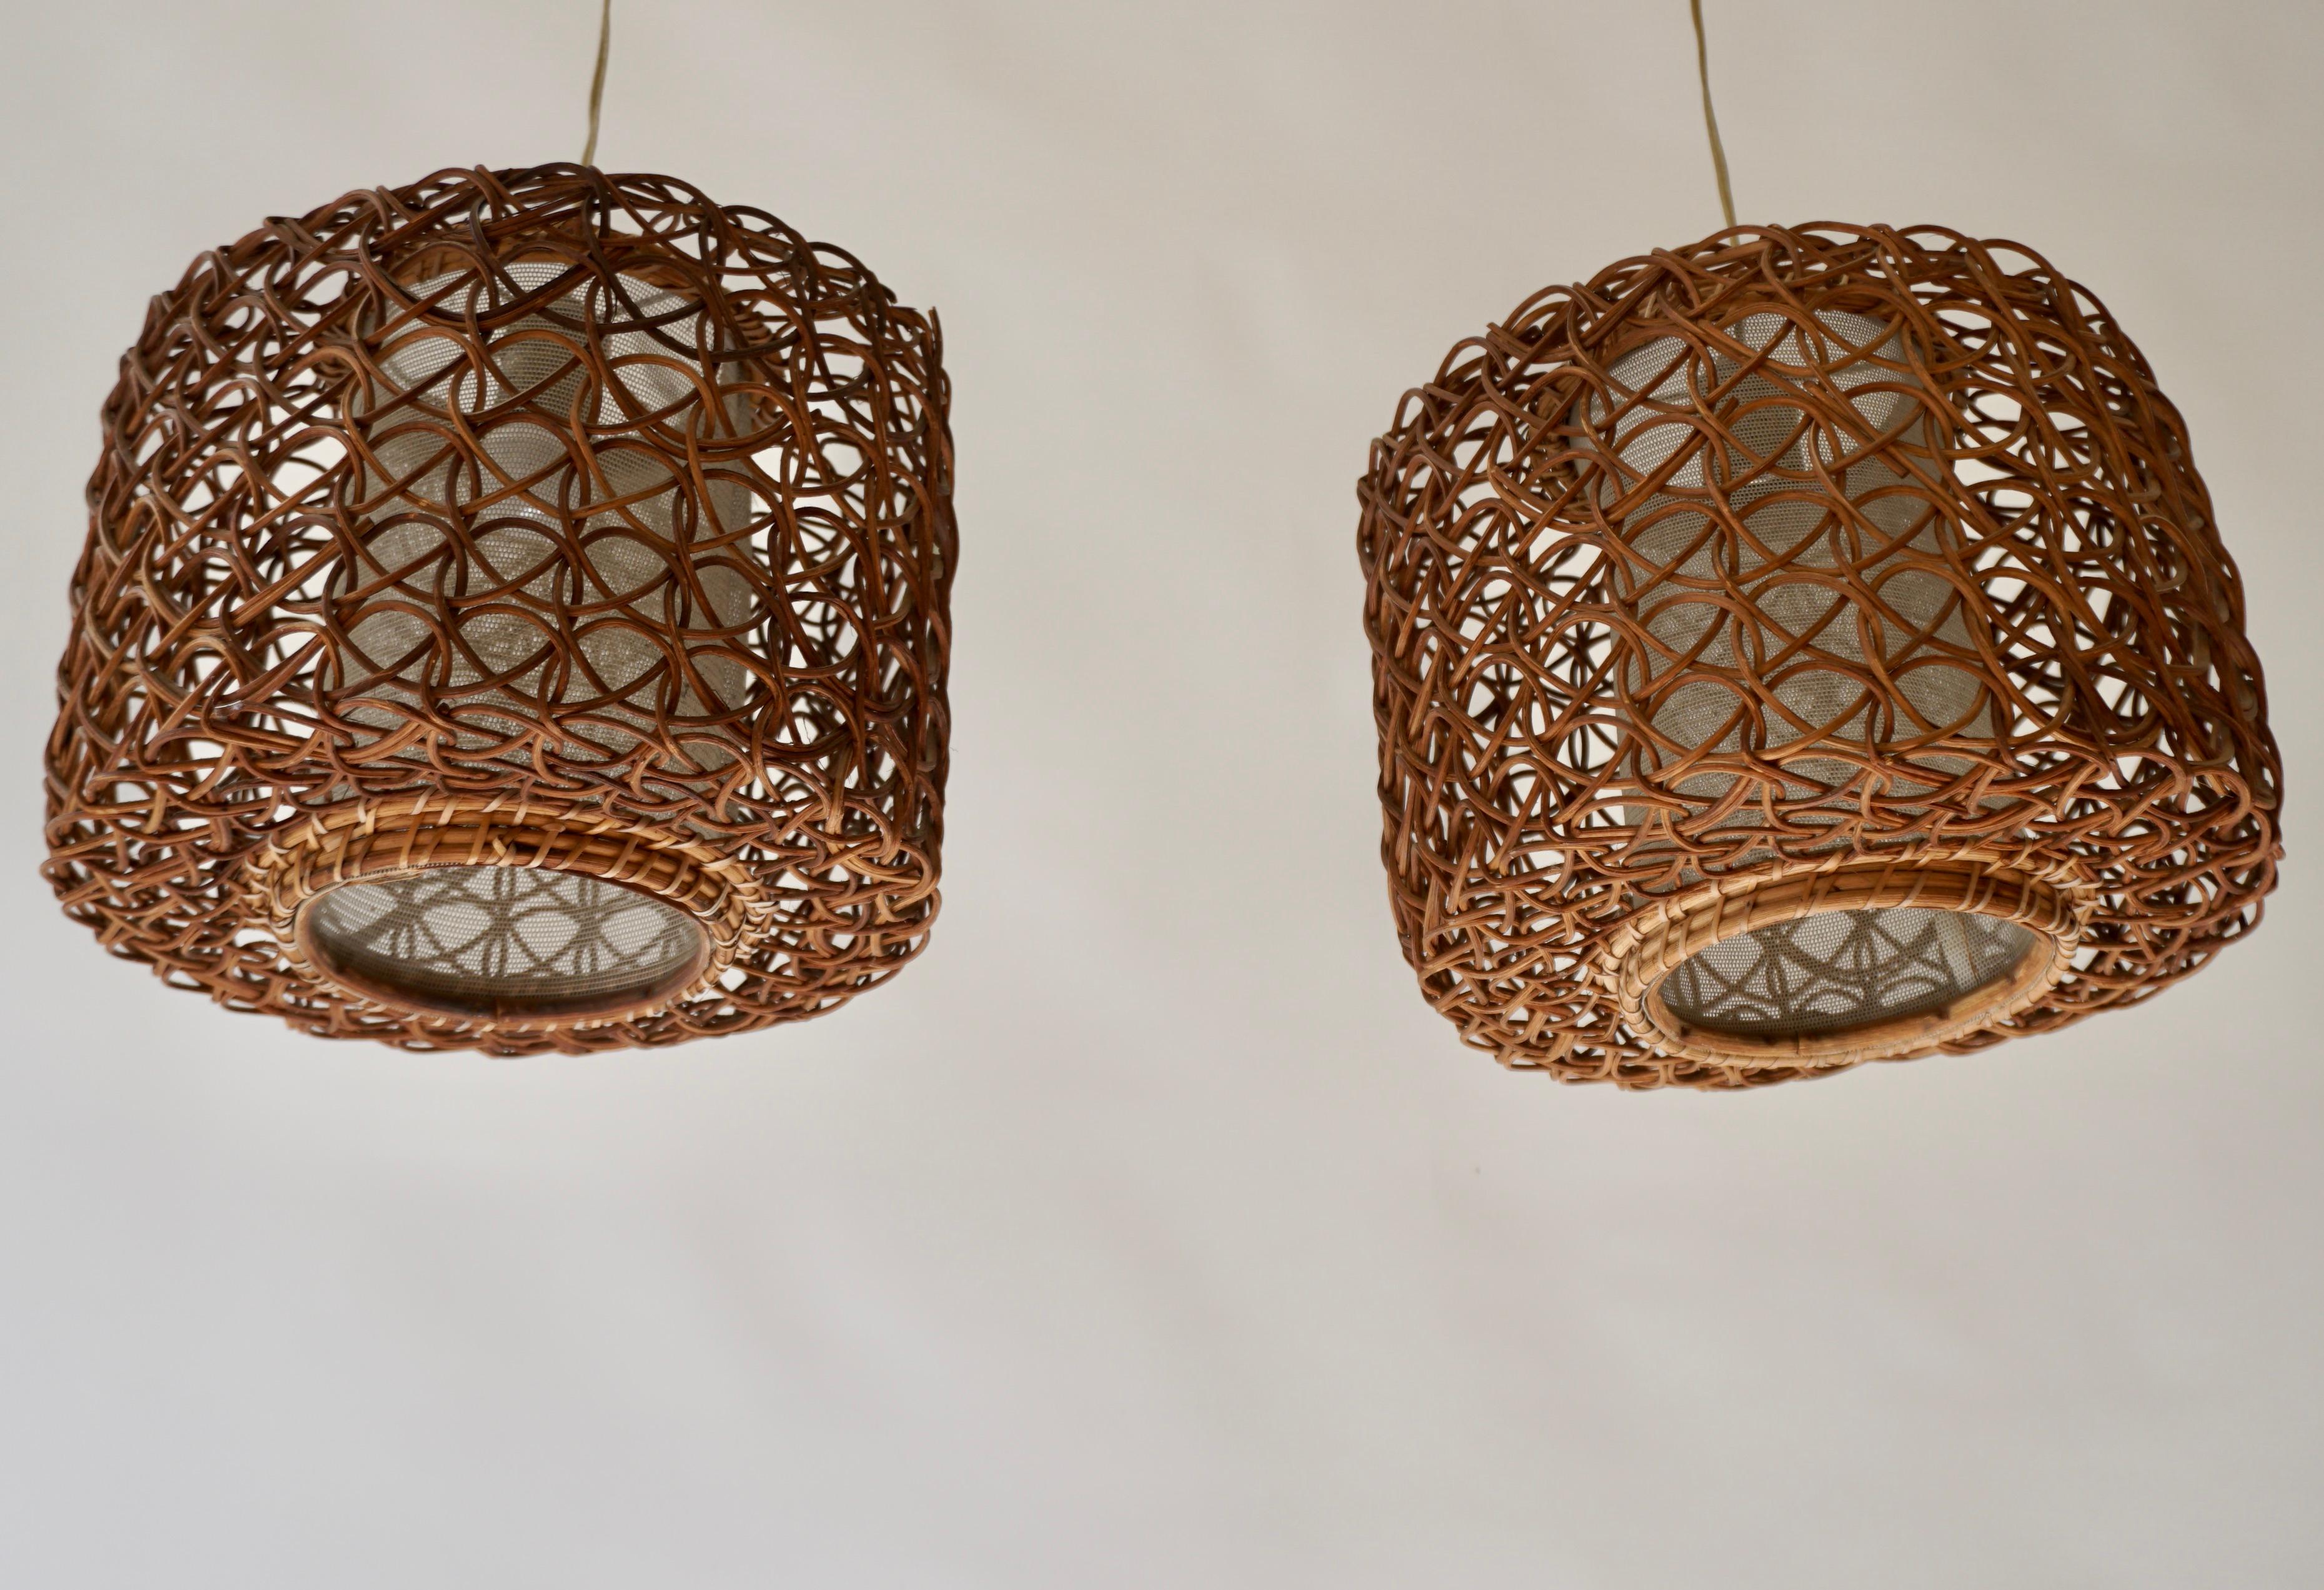 Three French rattan pendant lights with an interior shade with a sort of linen texture. The interior shade is surrounded by a separate, round, rattan encasement.

Diameter 11.4